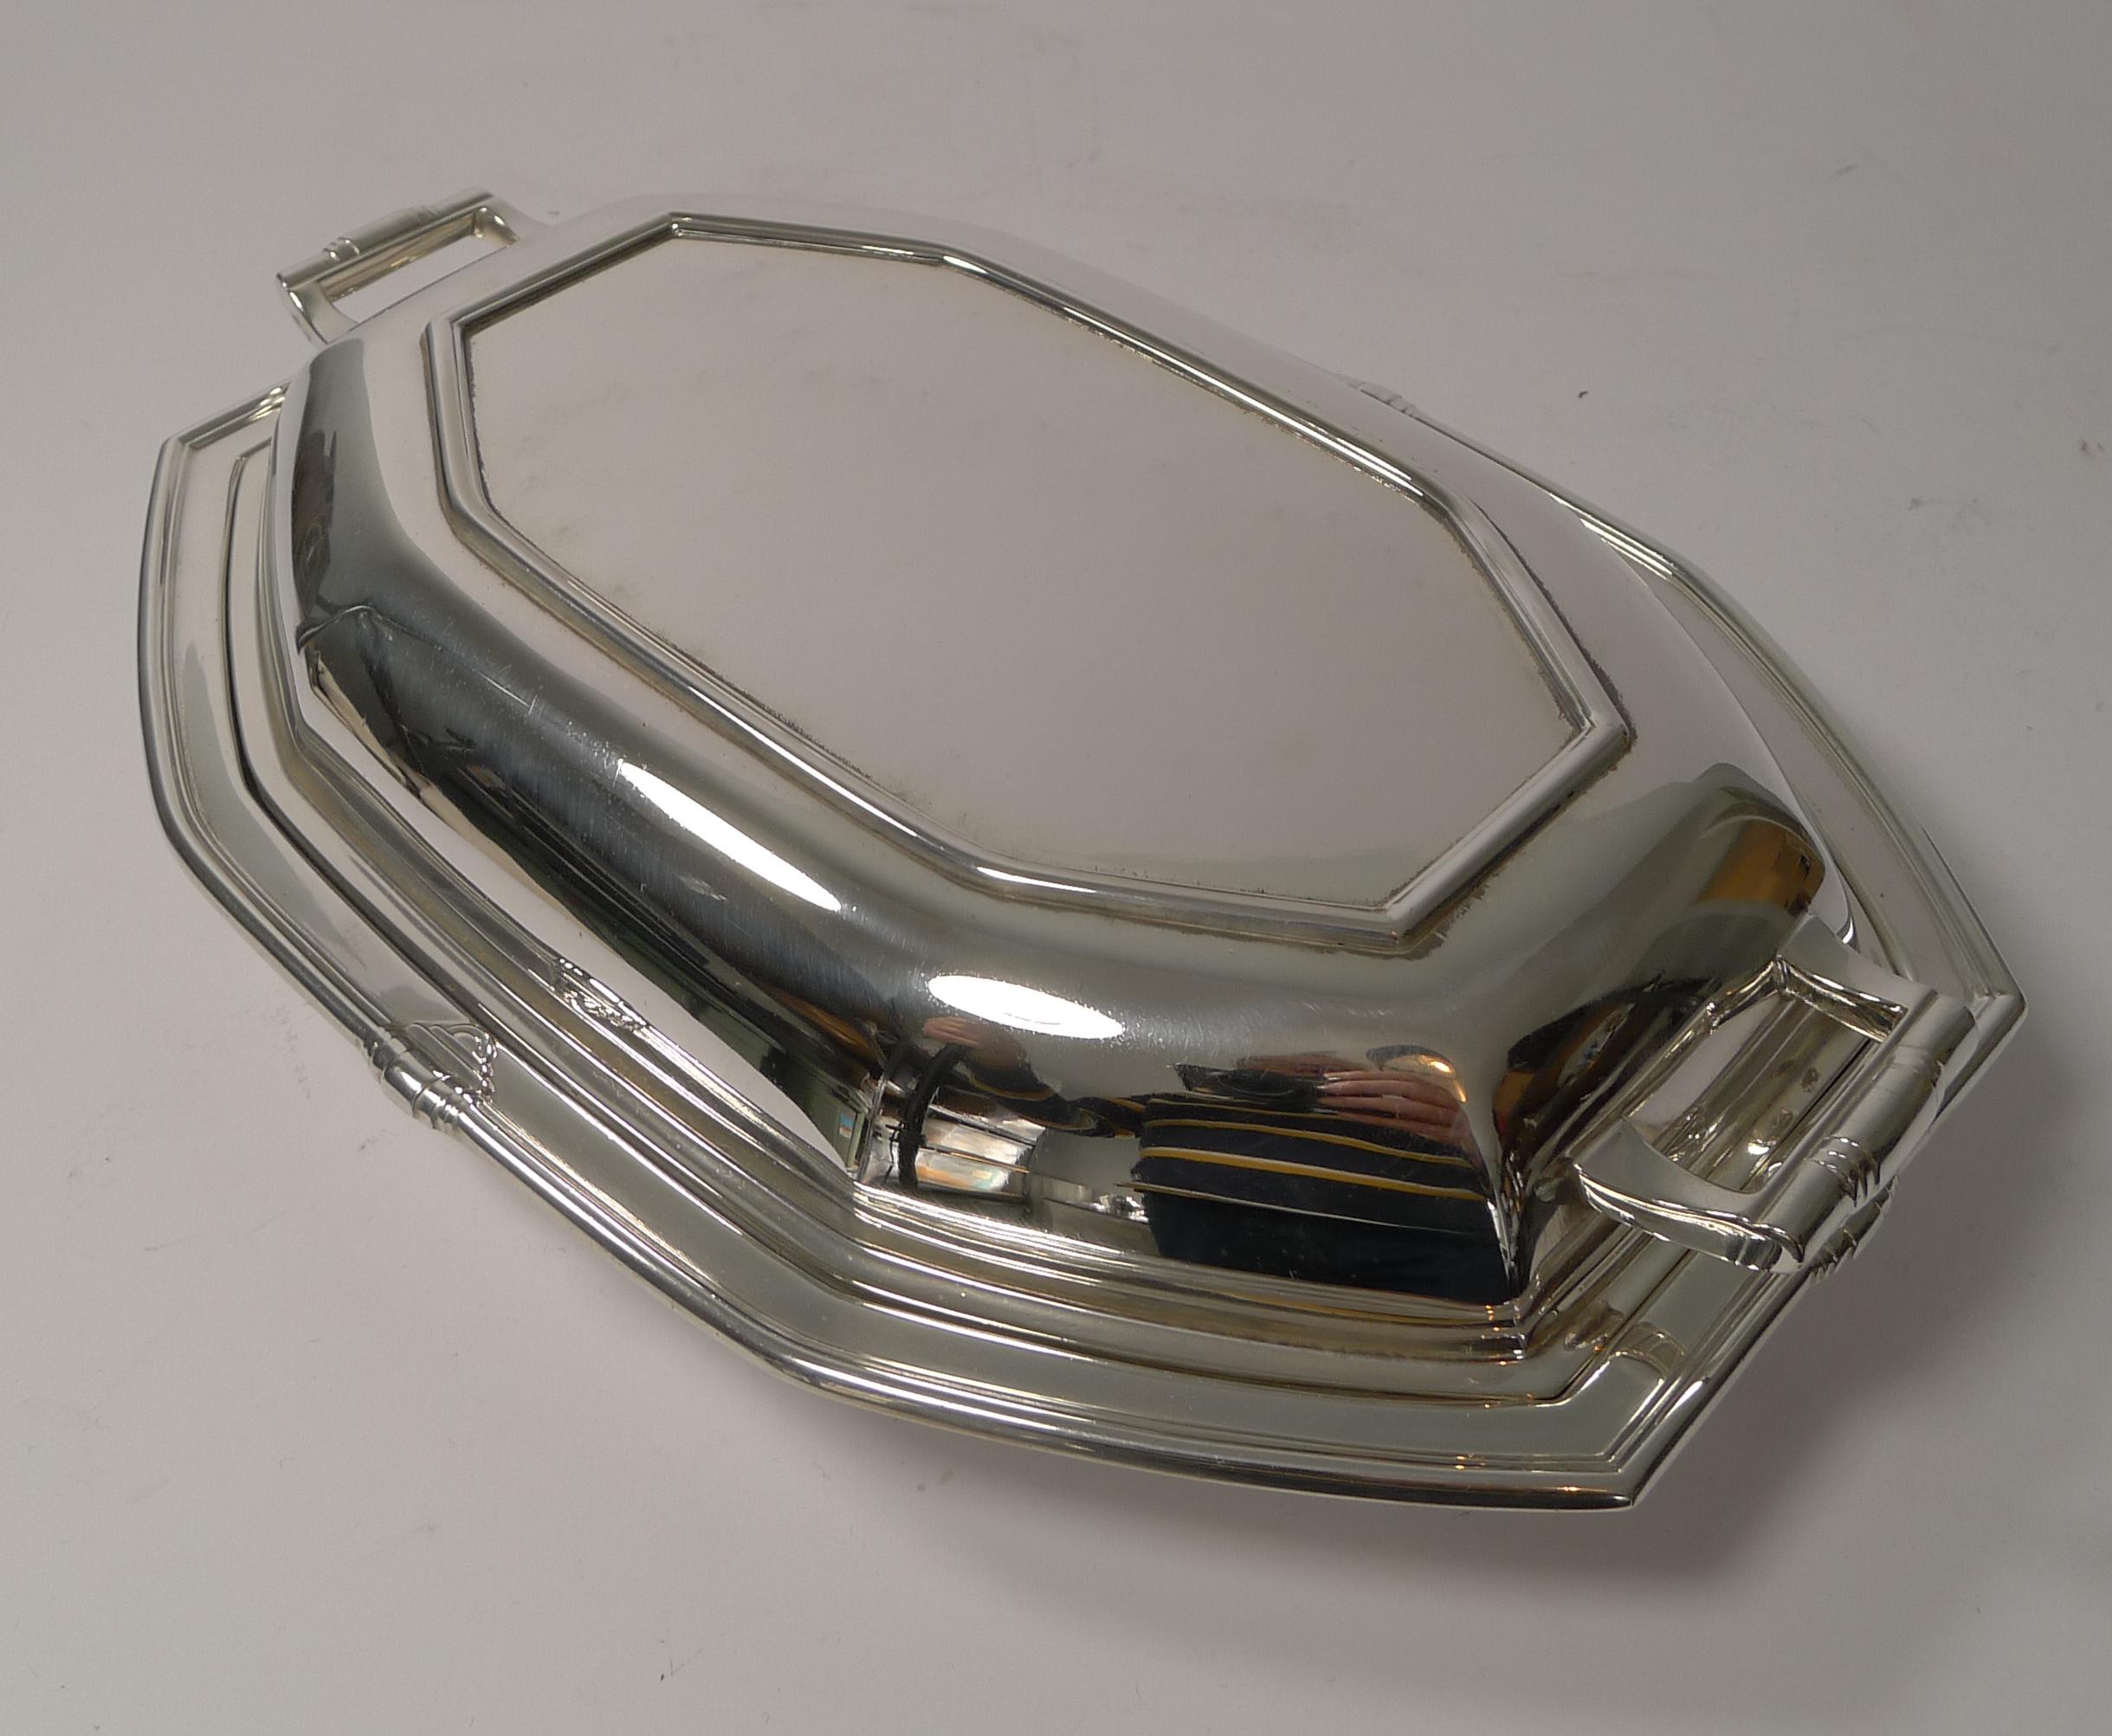 Art Deco Silver Plated Entree / Serving Dish by Frank Cobb & Co. 7